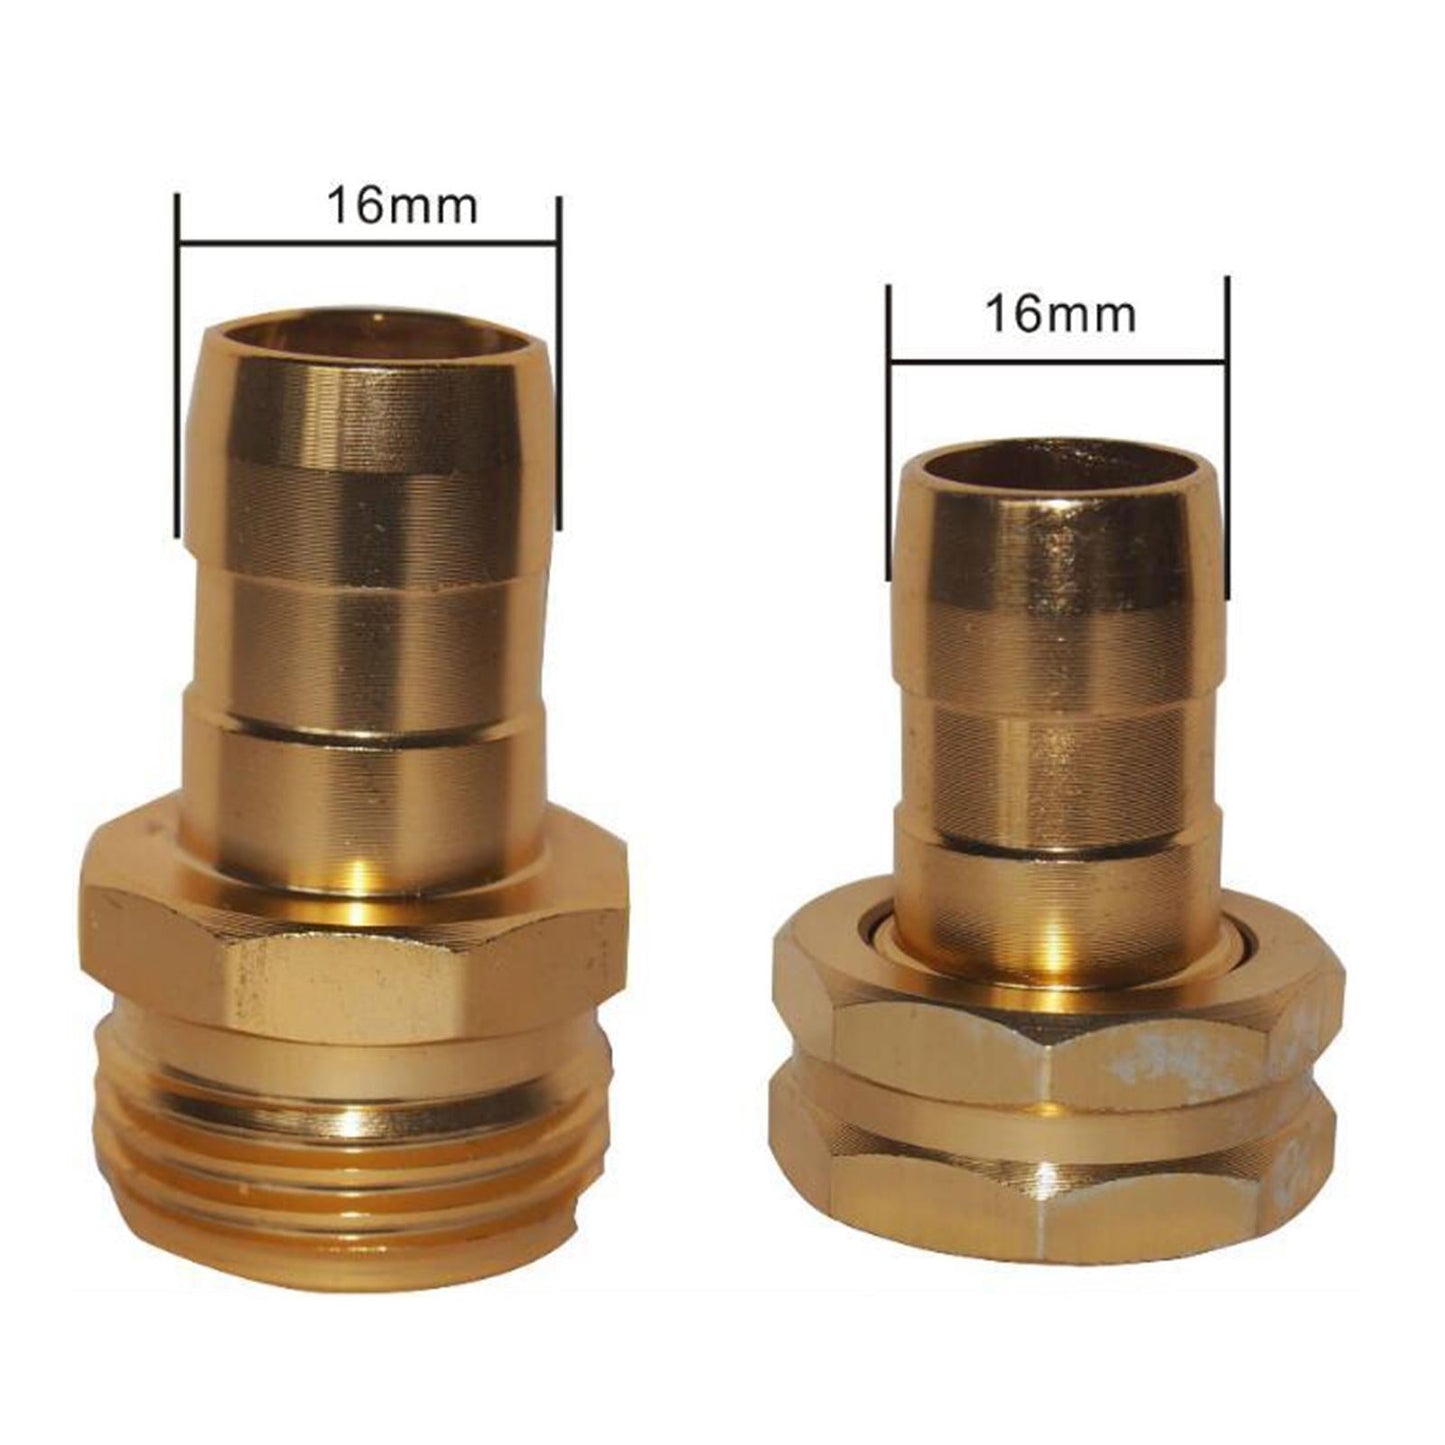 1 Pair 5/8 Inch Garden Brass Mender End Repair Kit Solid Brass Hose male and female Adapter Sprayers Nozzle with Stainless Steel Clamp Accessories